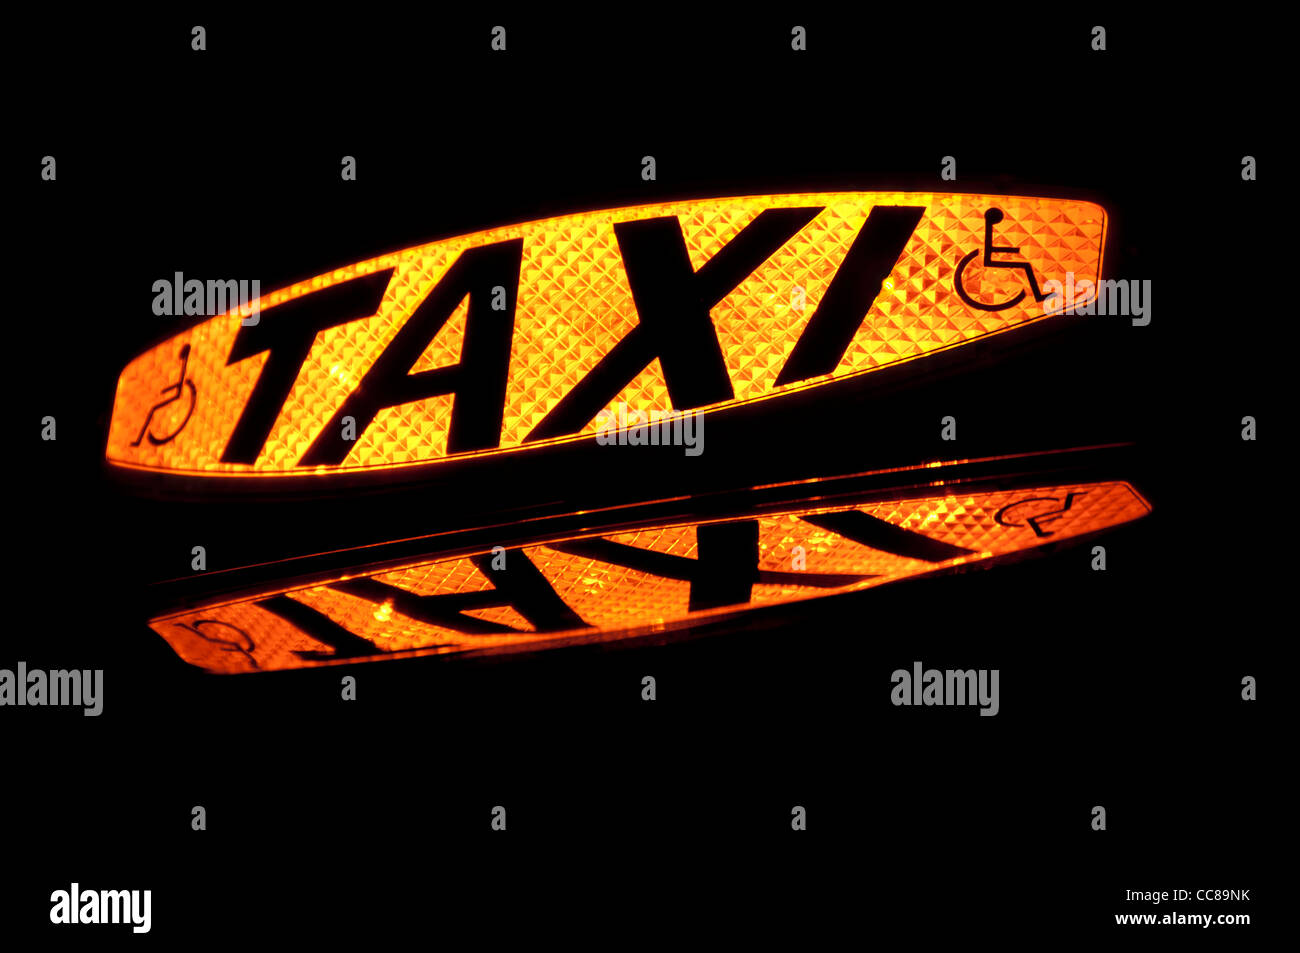 Illuminated Taxi sign showing the word Taxi and a disabled symbol to show a wheelchair accessible vehicle Stock Photo